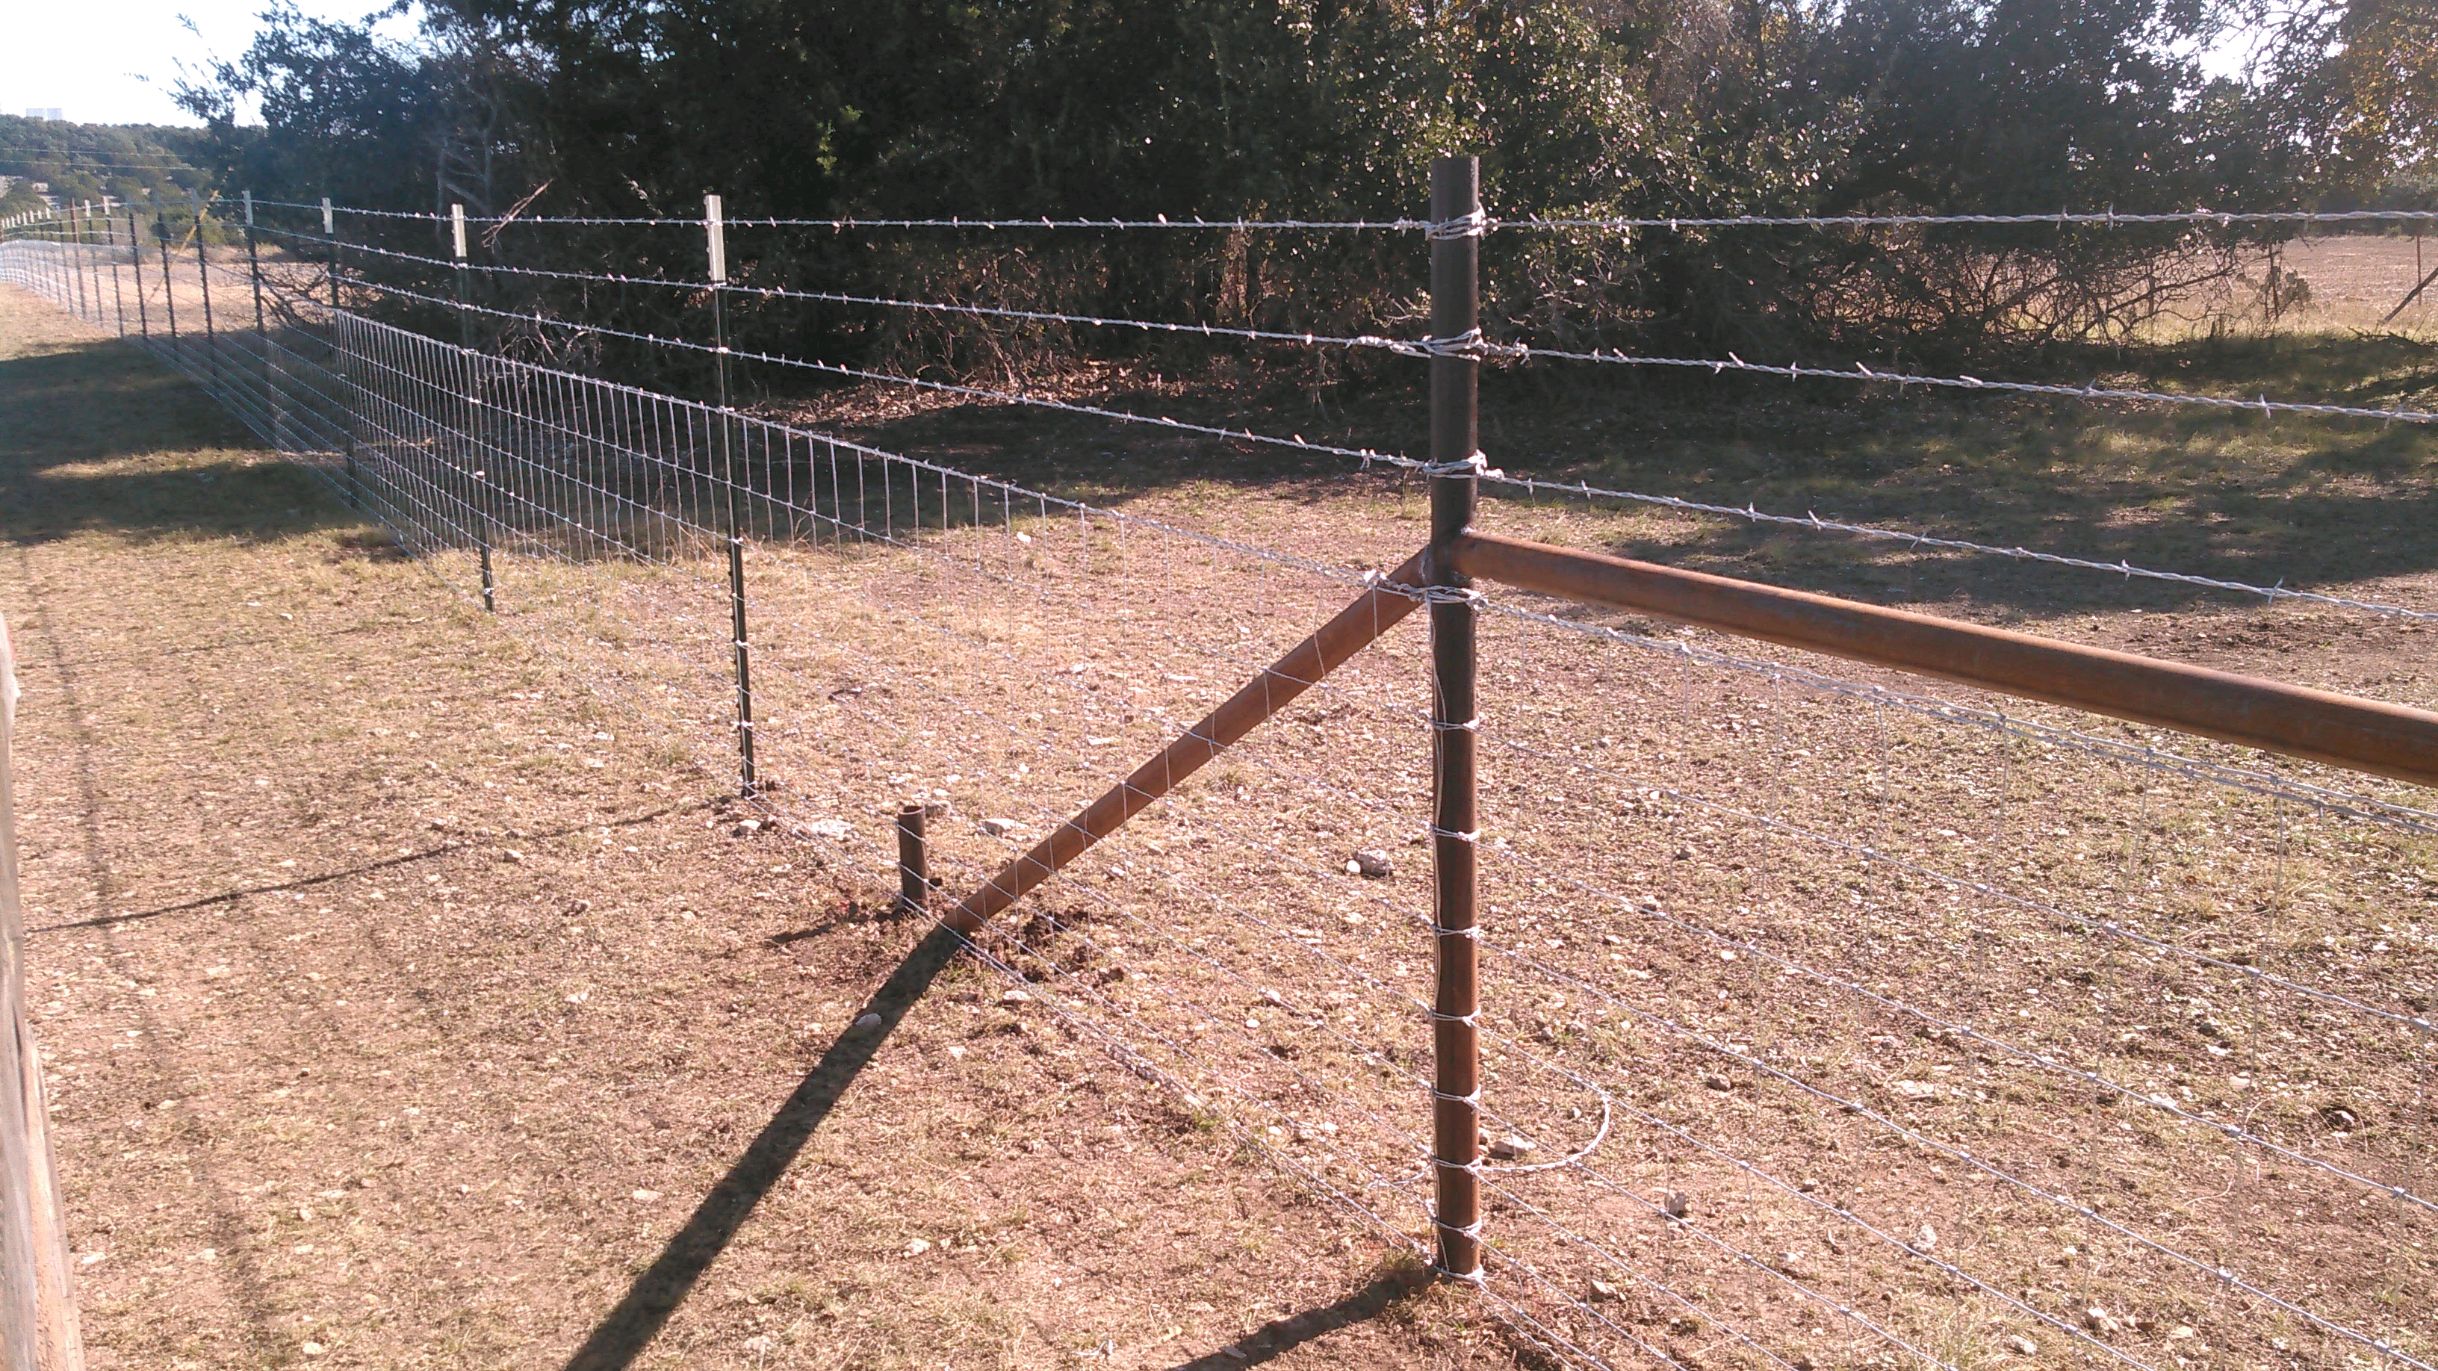 Ranch and Cattle fencing with barbed wire top